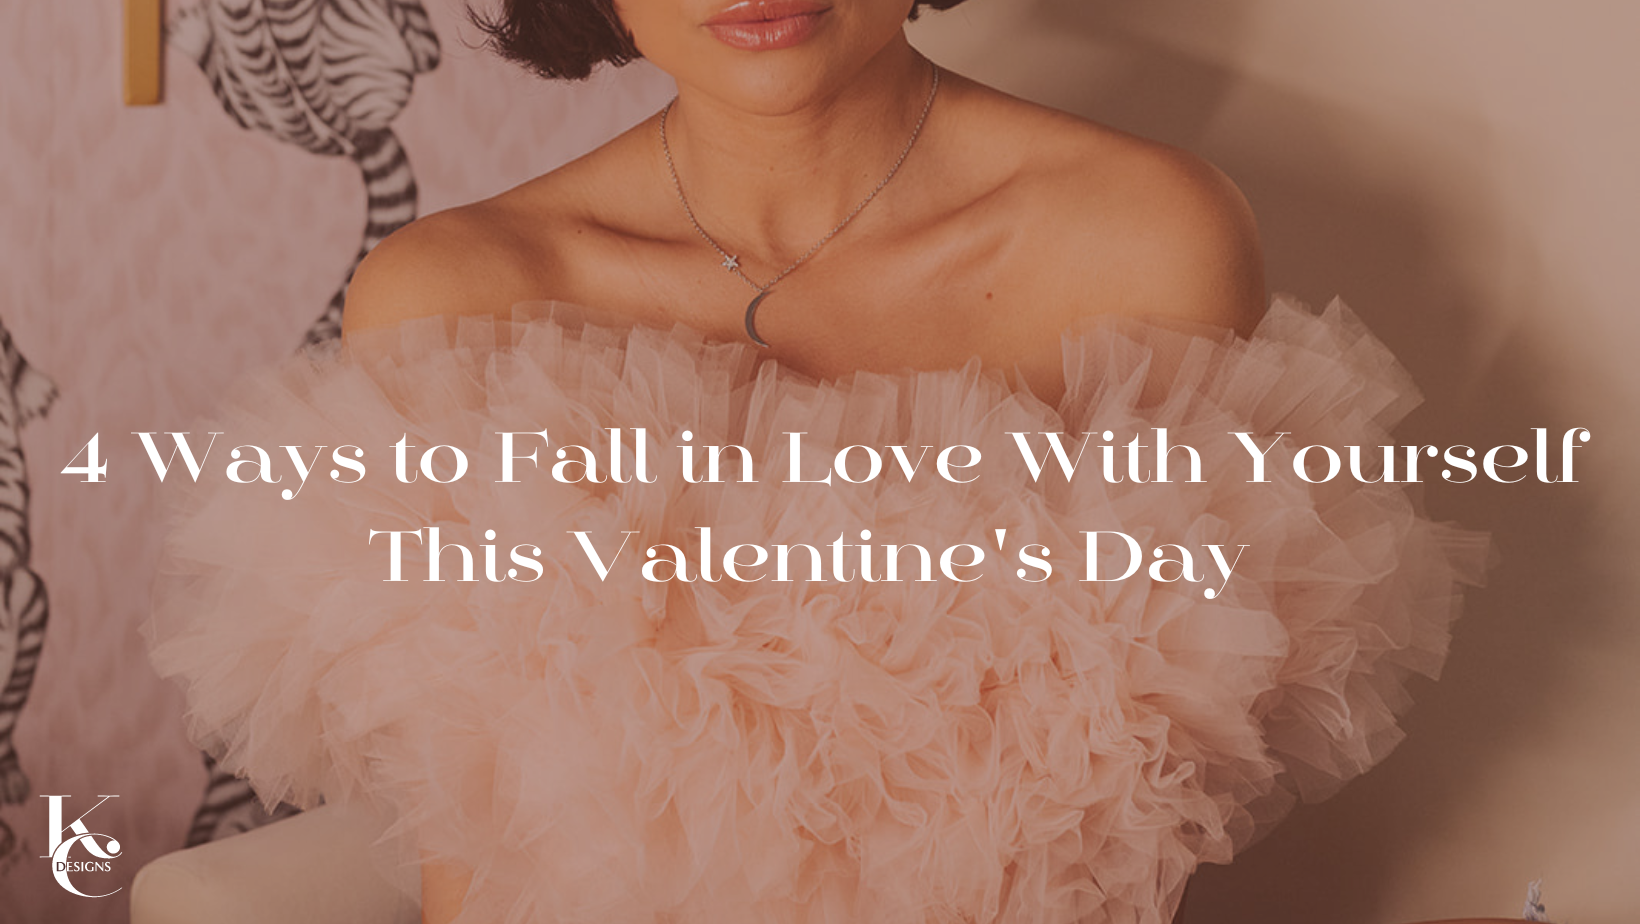 4 Ways to Fall in Love with Yourself This Valentine’s Day